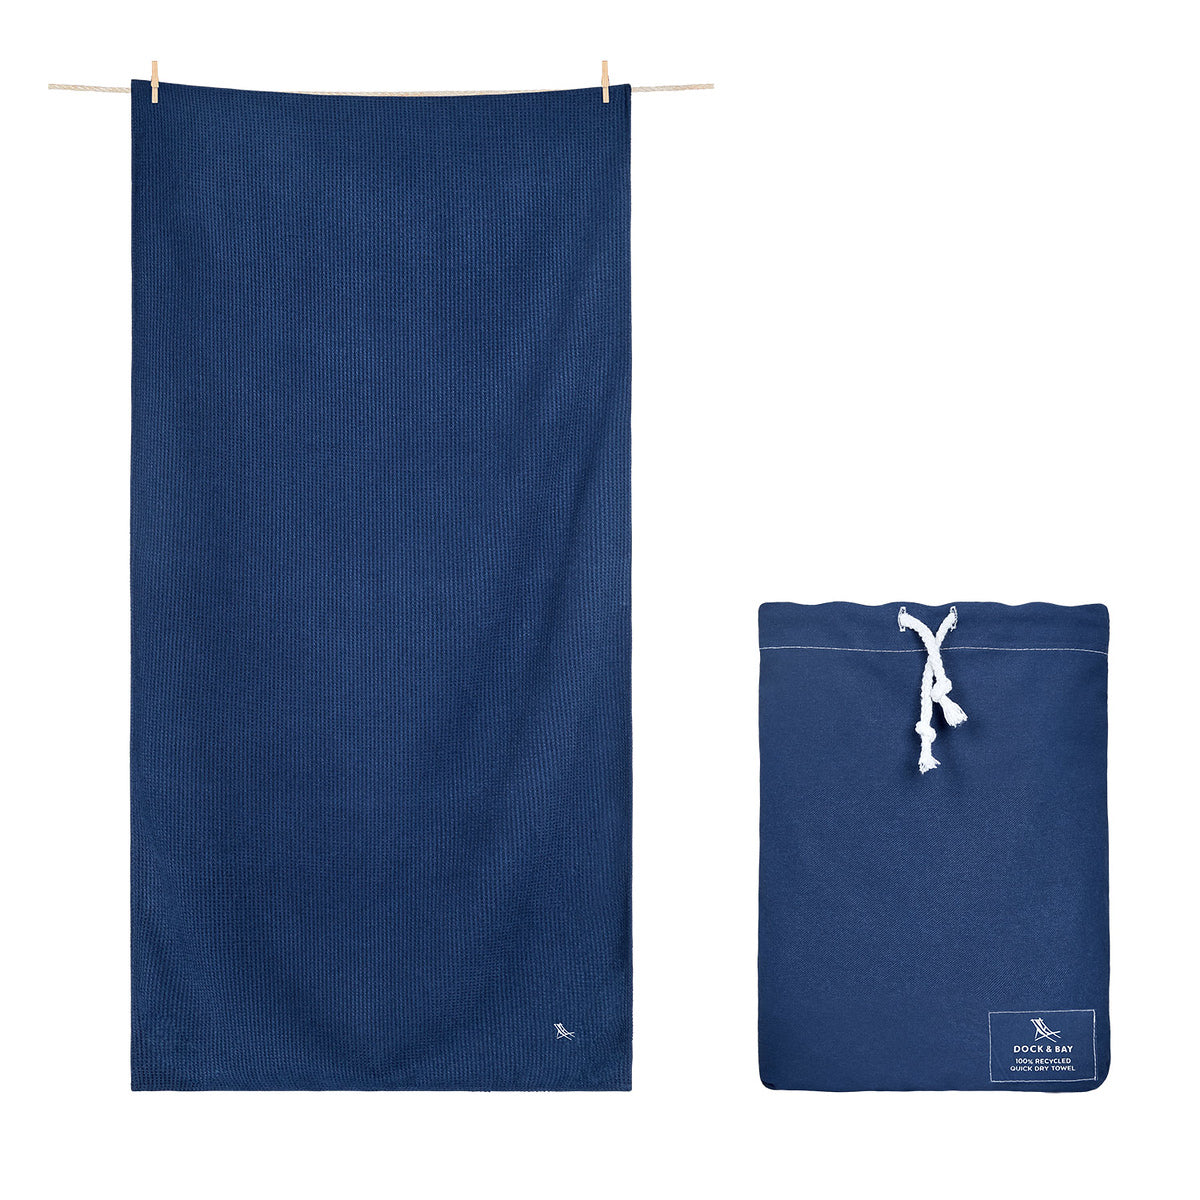 01_TOWLH-CLA-NAVY-combo-linepouch-X3.jpg